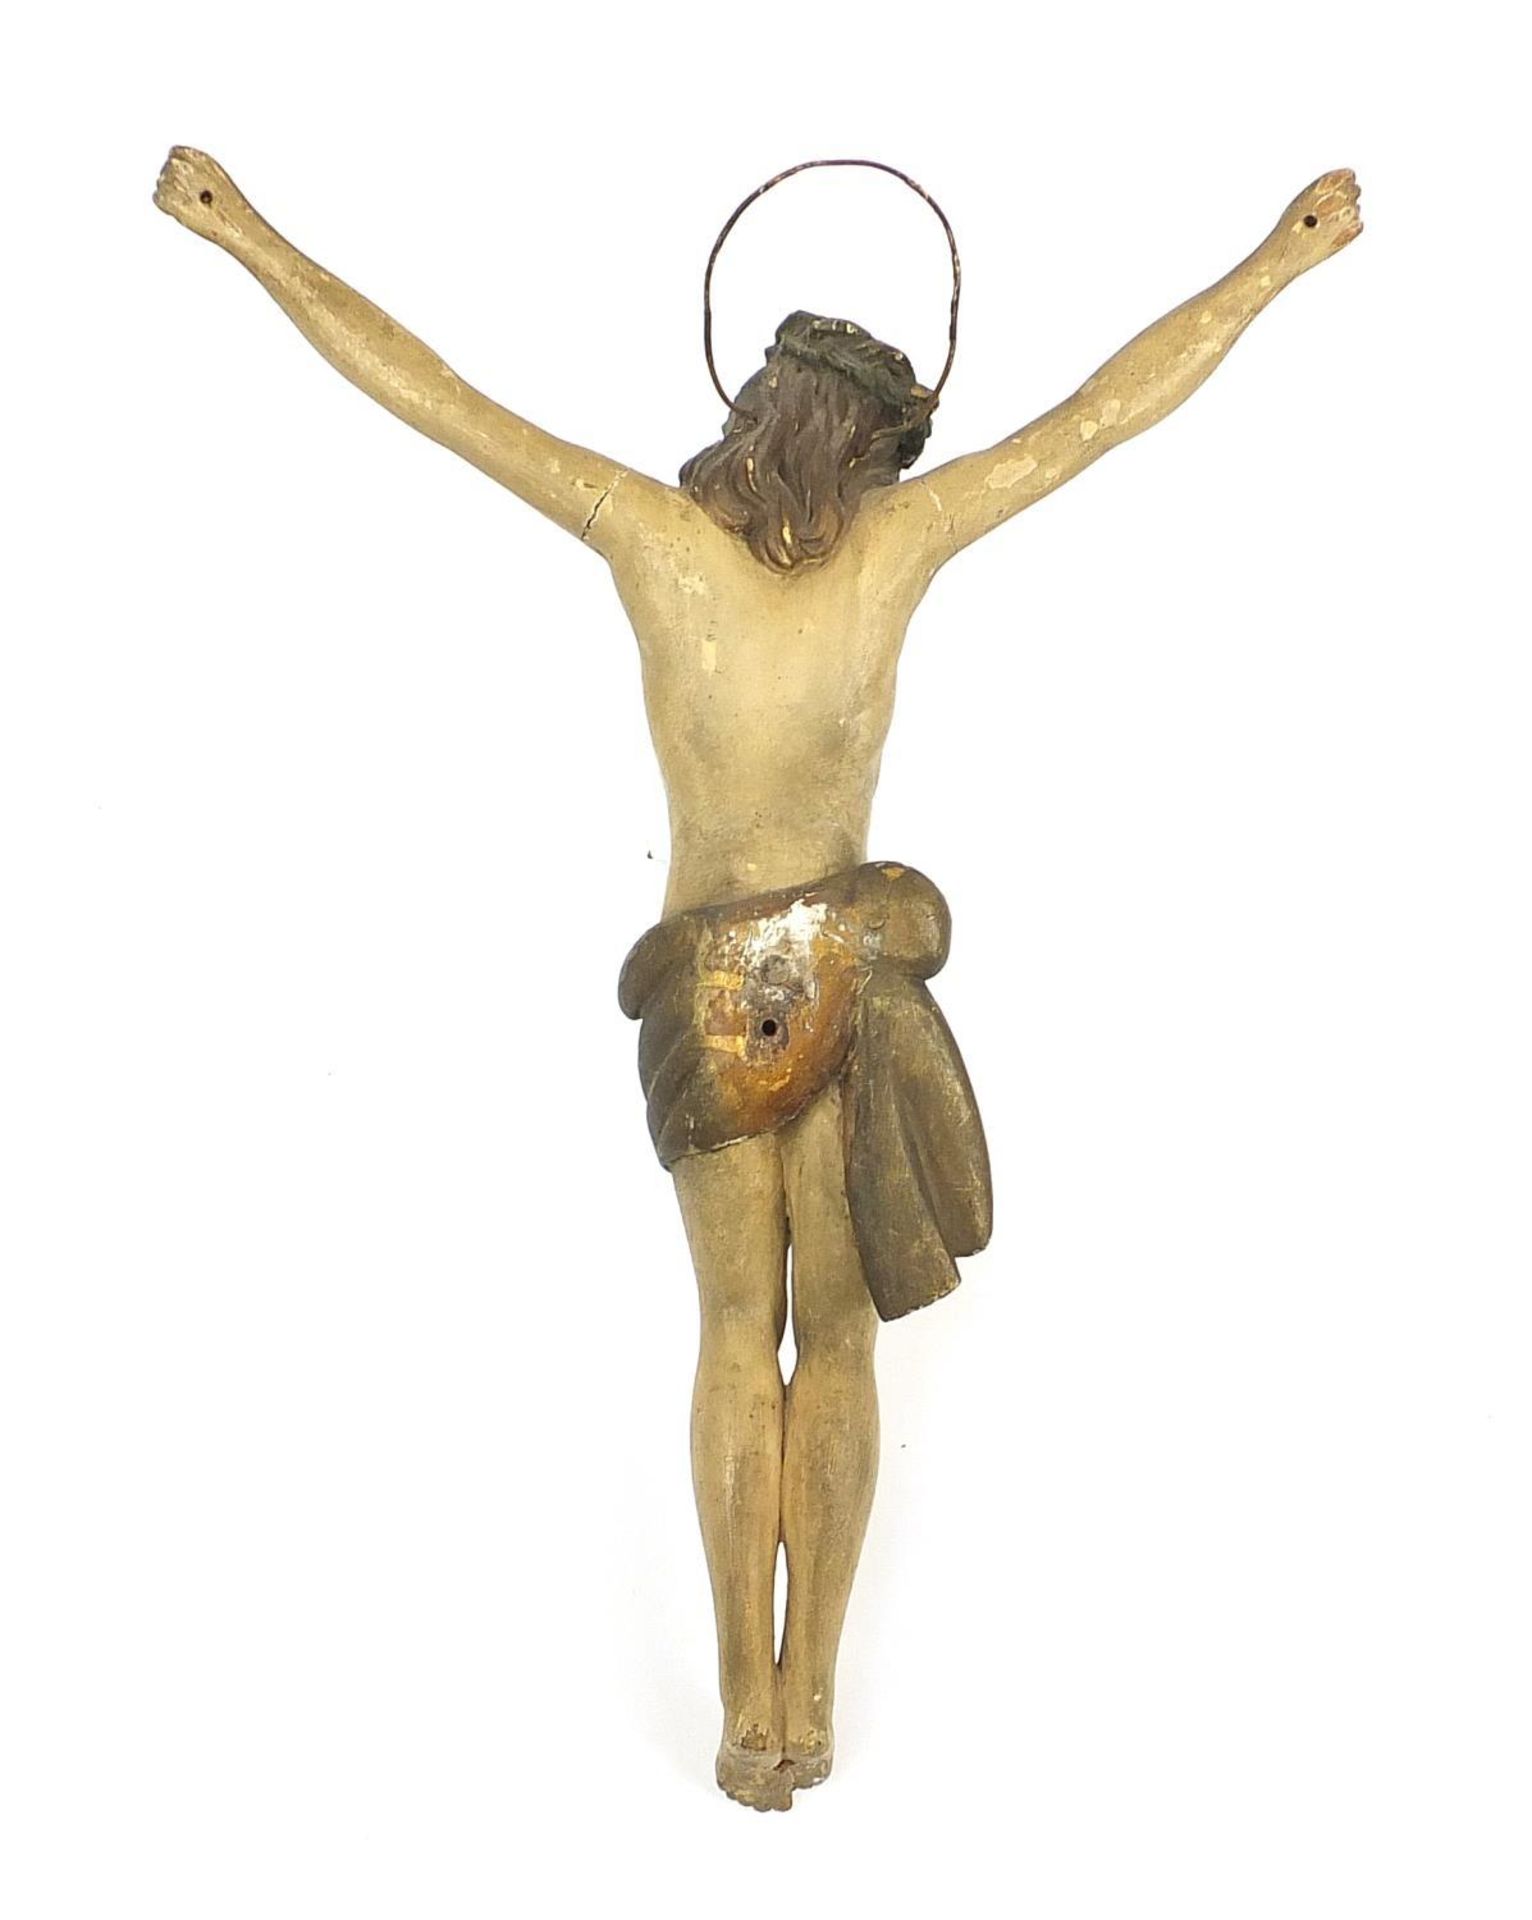 Antique painted lacquered wood carving of Christ with crown of thorns, possibly German, 53cm high - Image 3 of 3